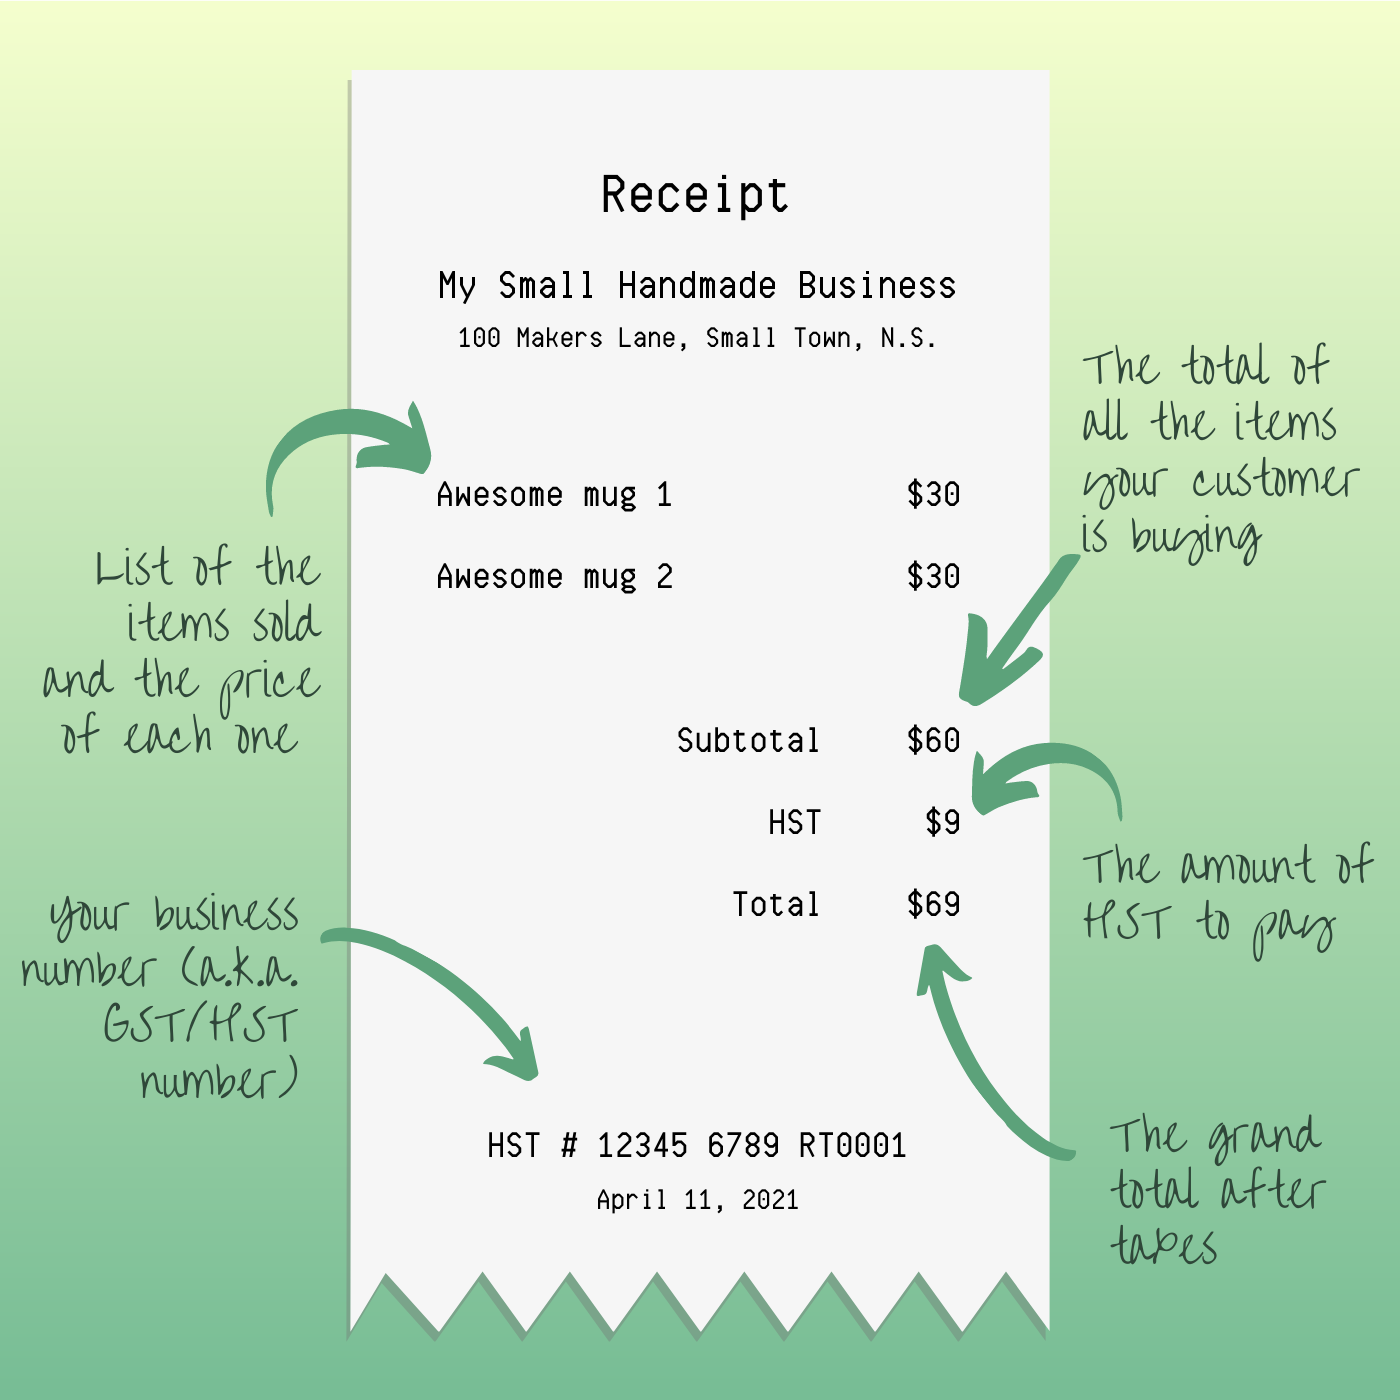 A sales receipt surrounded by arrows and text. The arrows point to the various parts of the receipt, such as the subtotal, HST and total after tax.